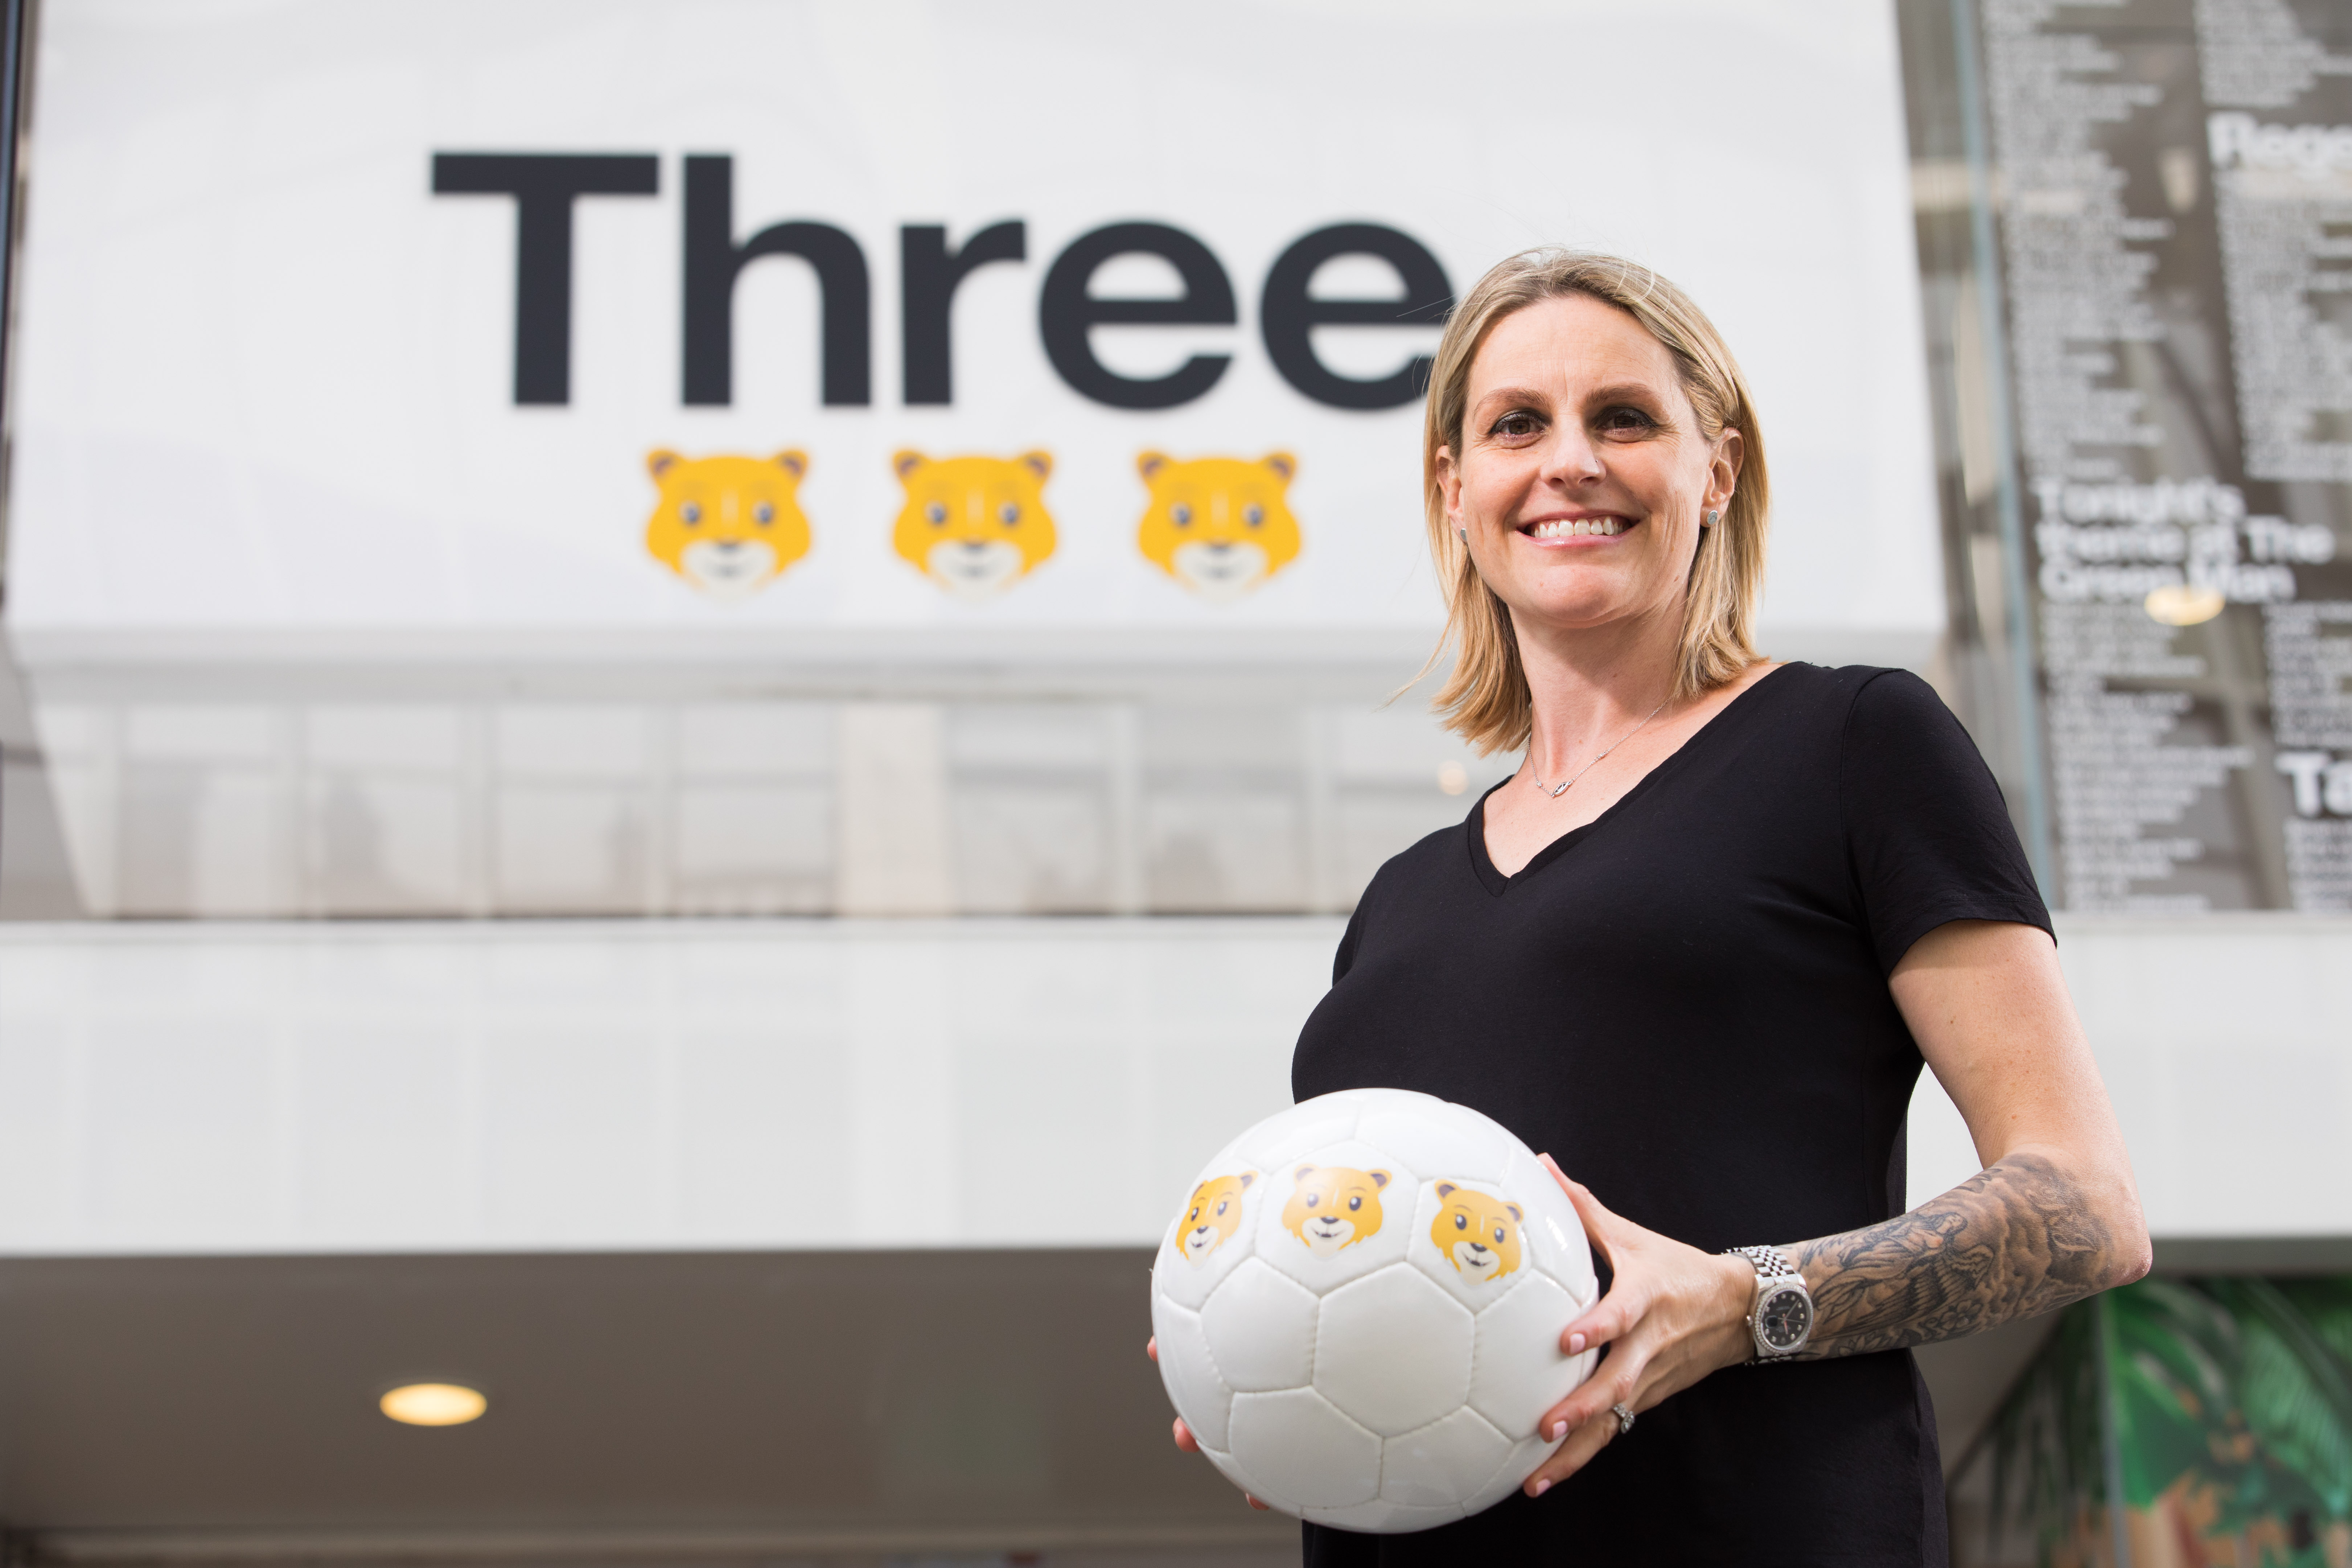 Kelly Smith MBE at the Three flagship store in Oxford Street London, which has revealed the first female lion emoji to be created, ahead of the Women's World Cup